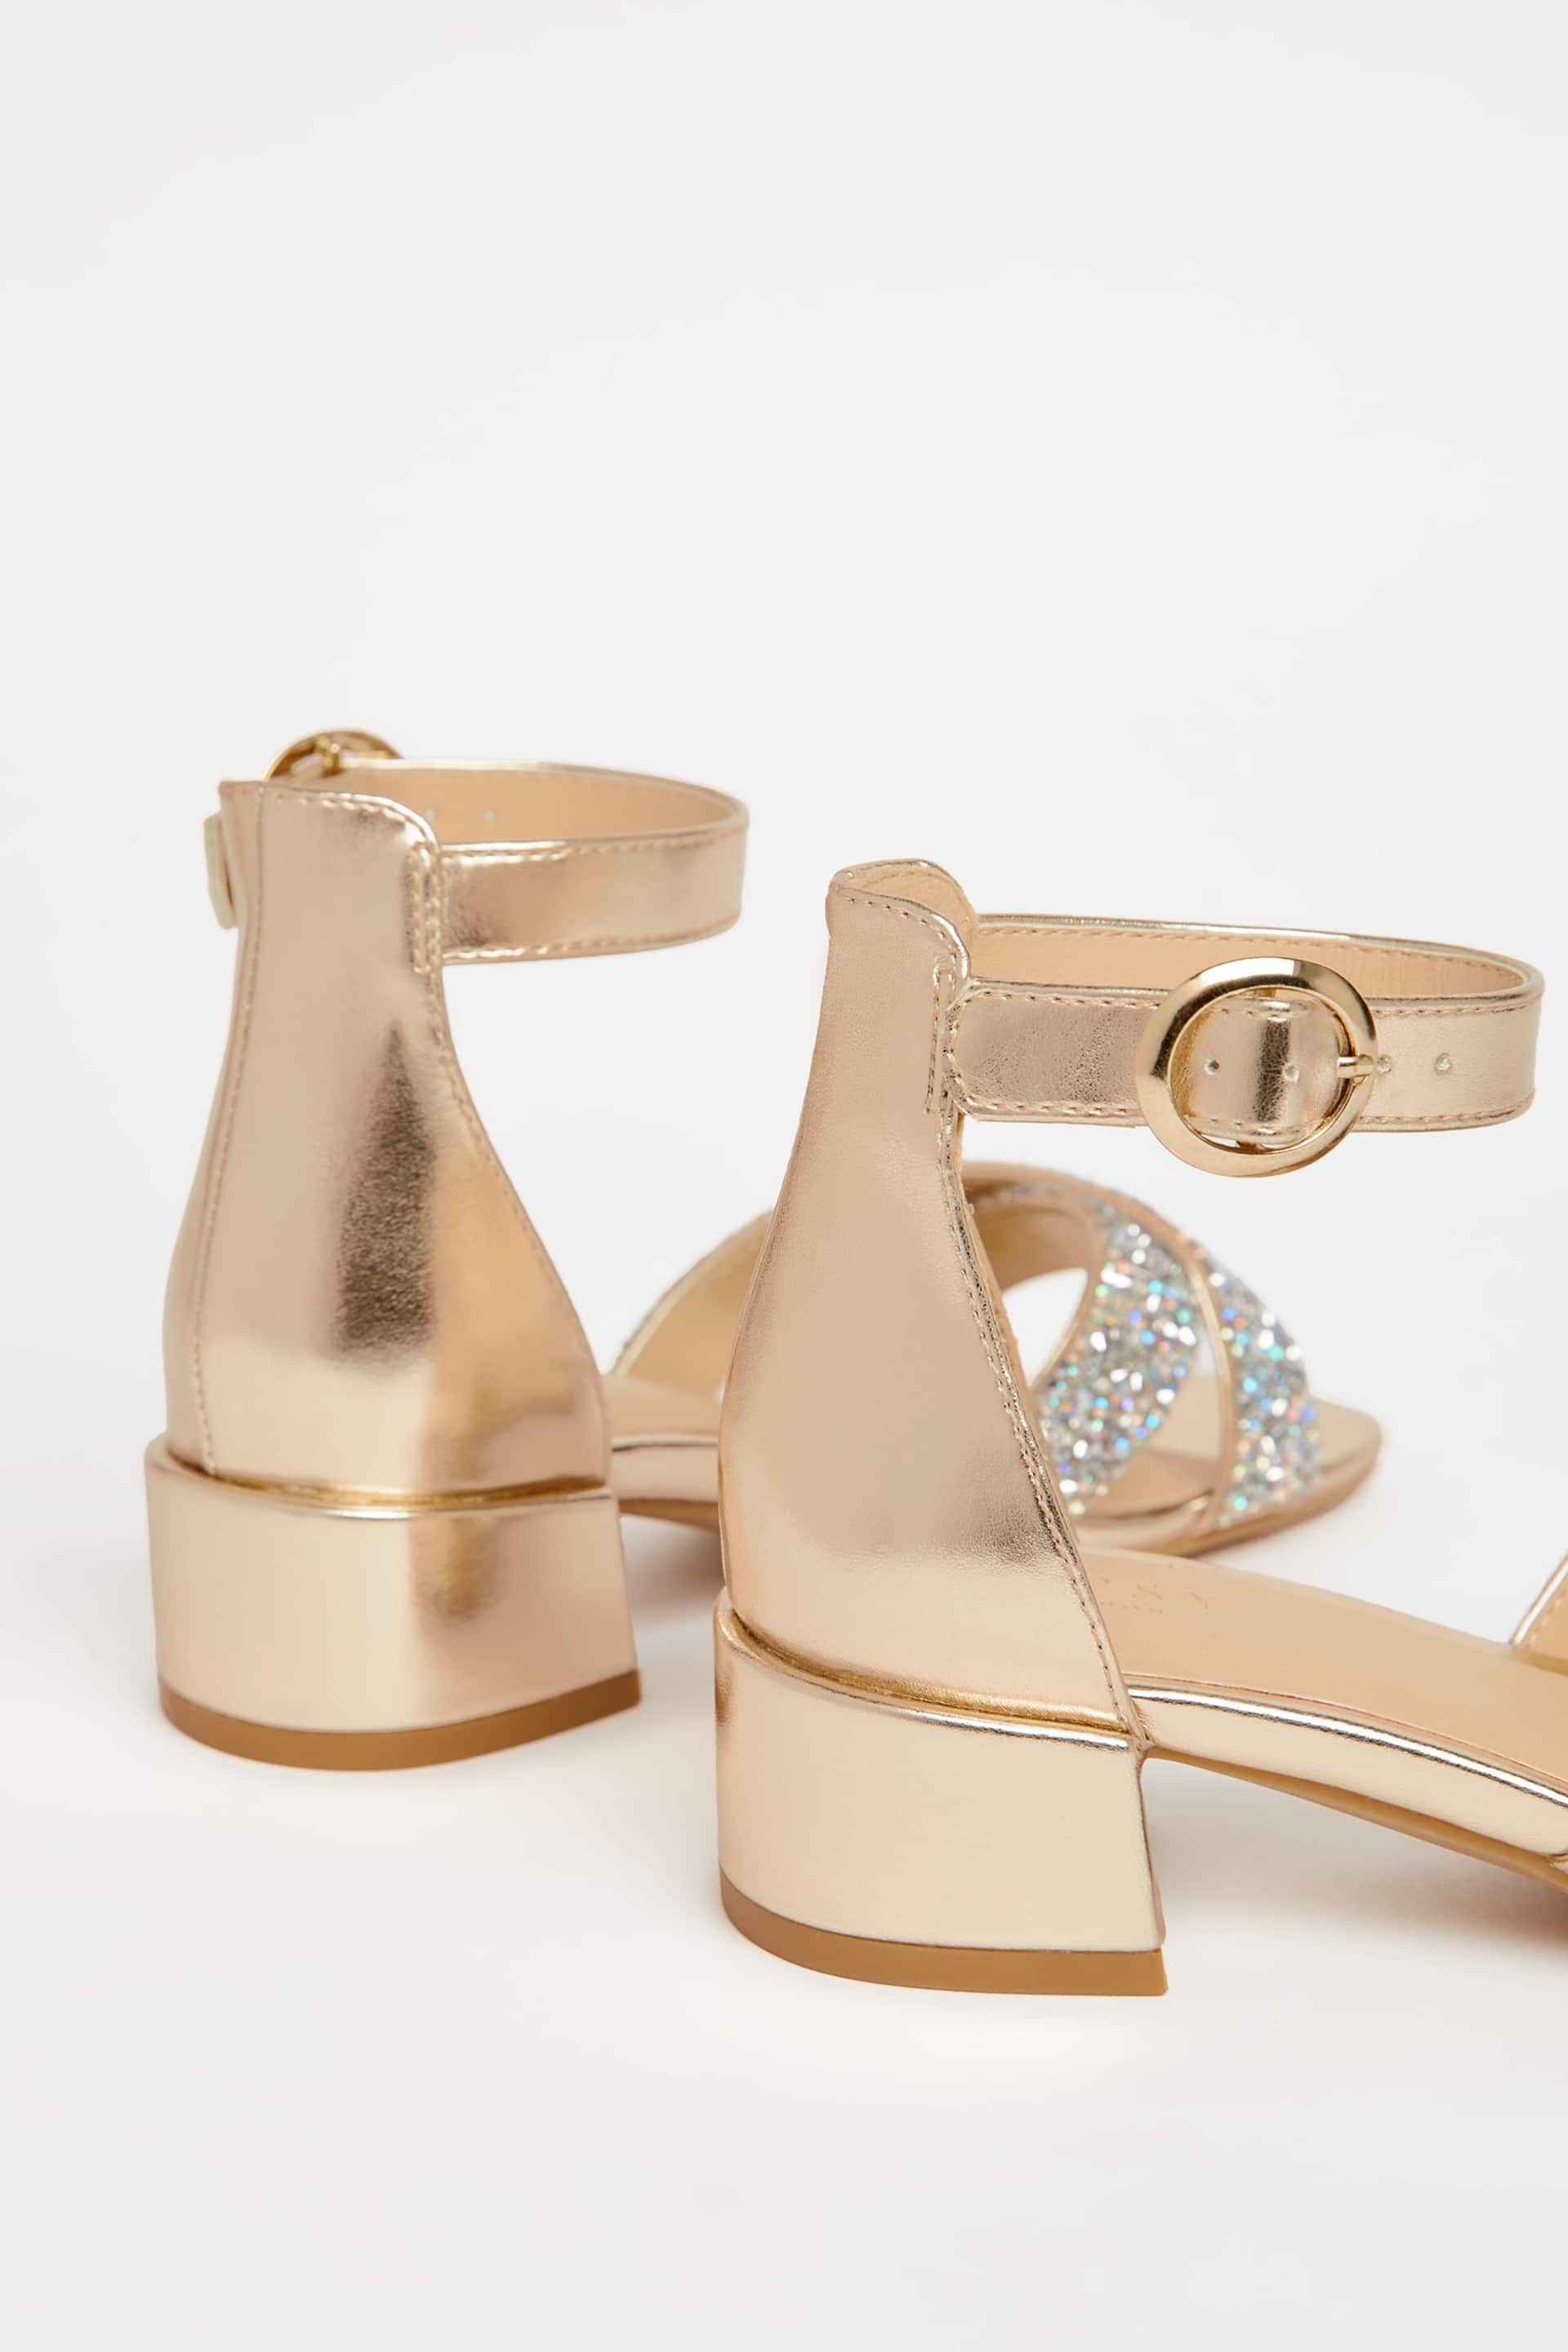 Lipsy Gold Low Block Heel Occasion Sandal - Image 3 of 4